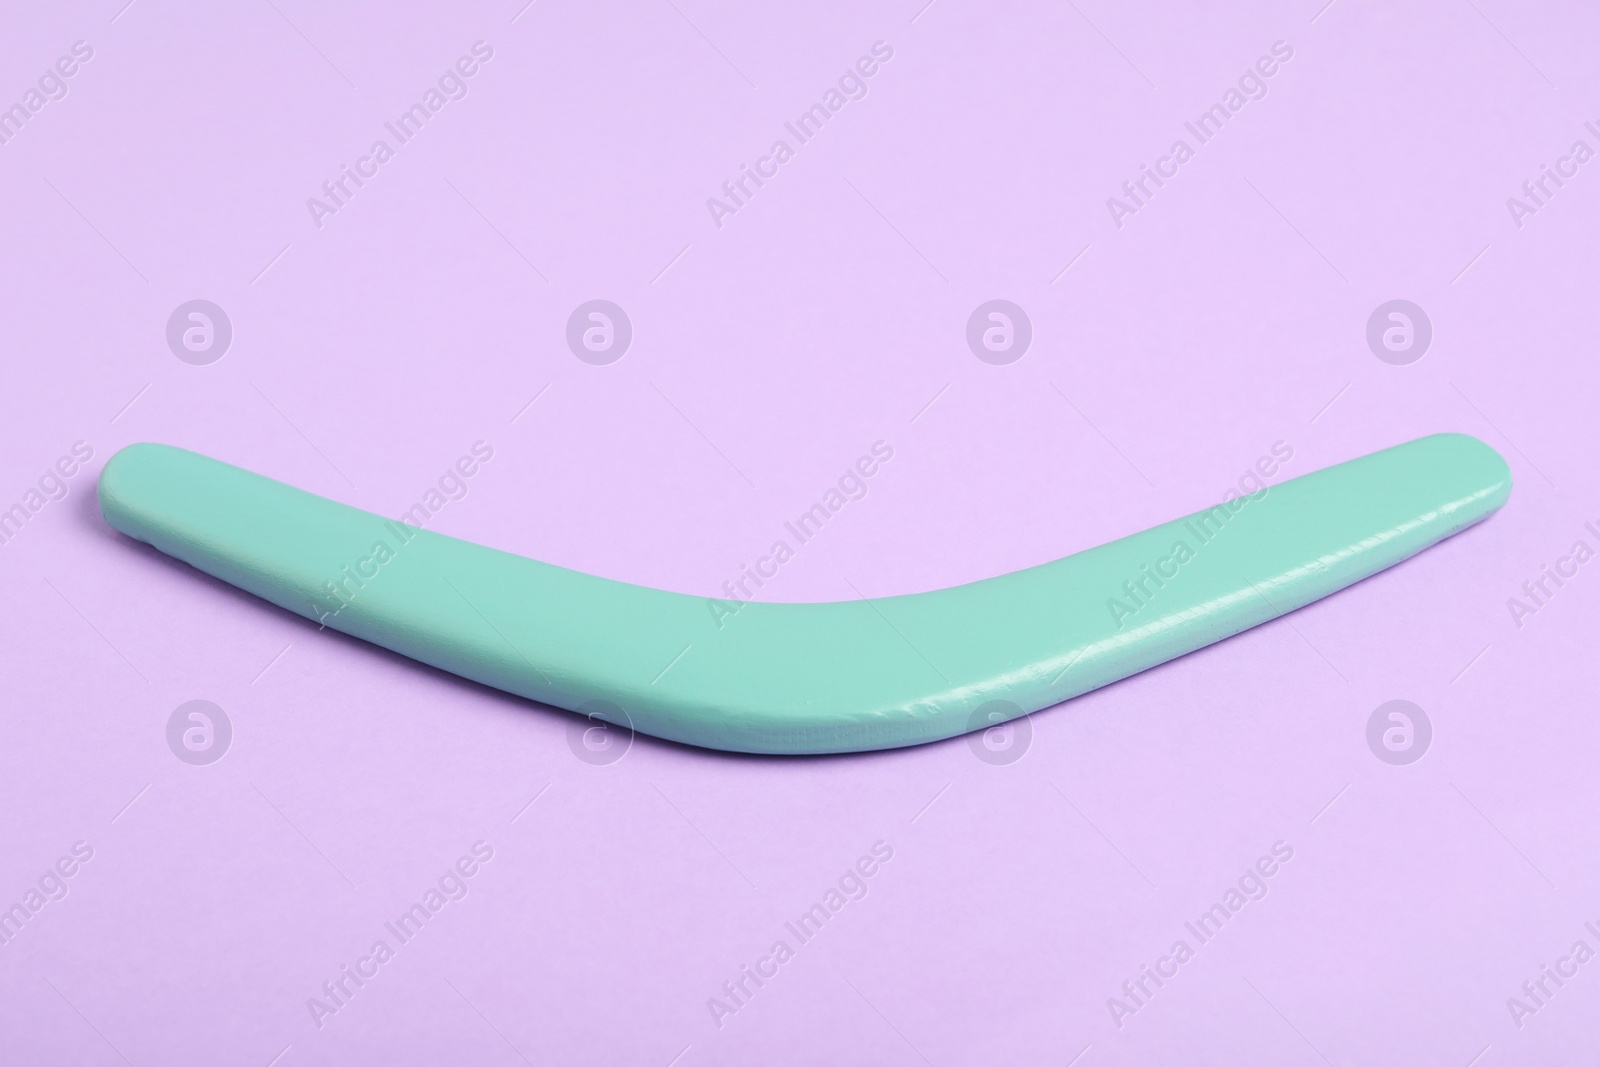 Photo of Turquoise boomerang on lilac background. Outdoor activity